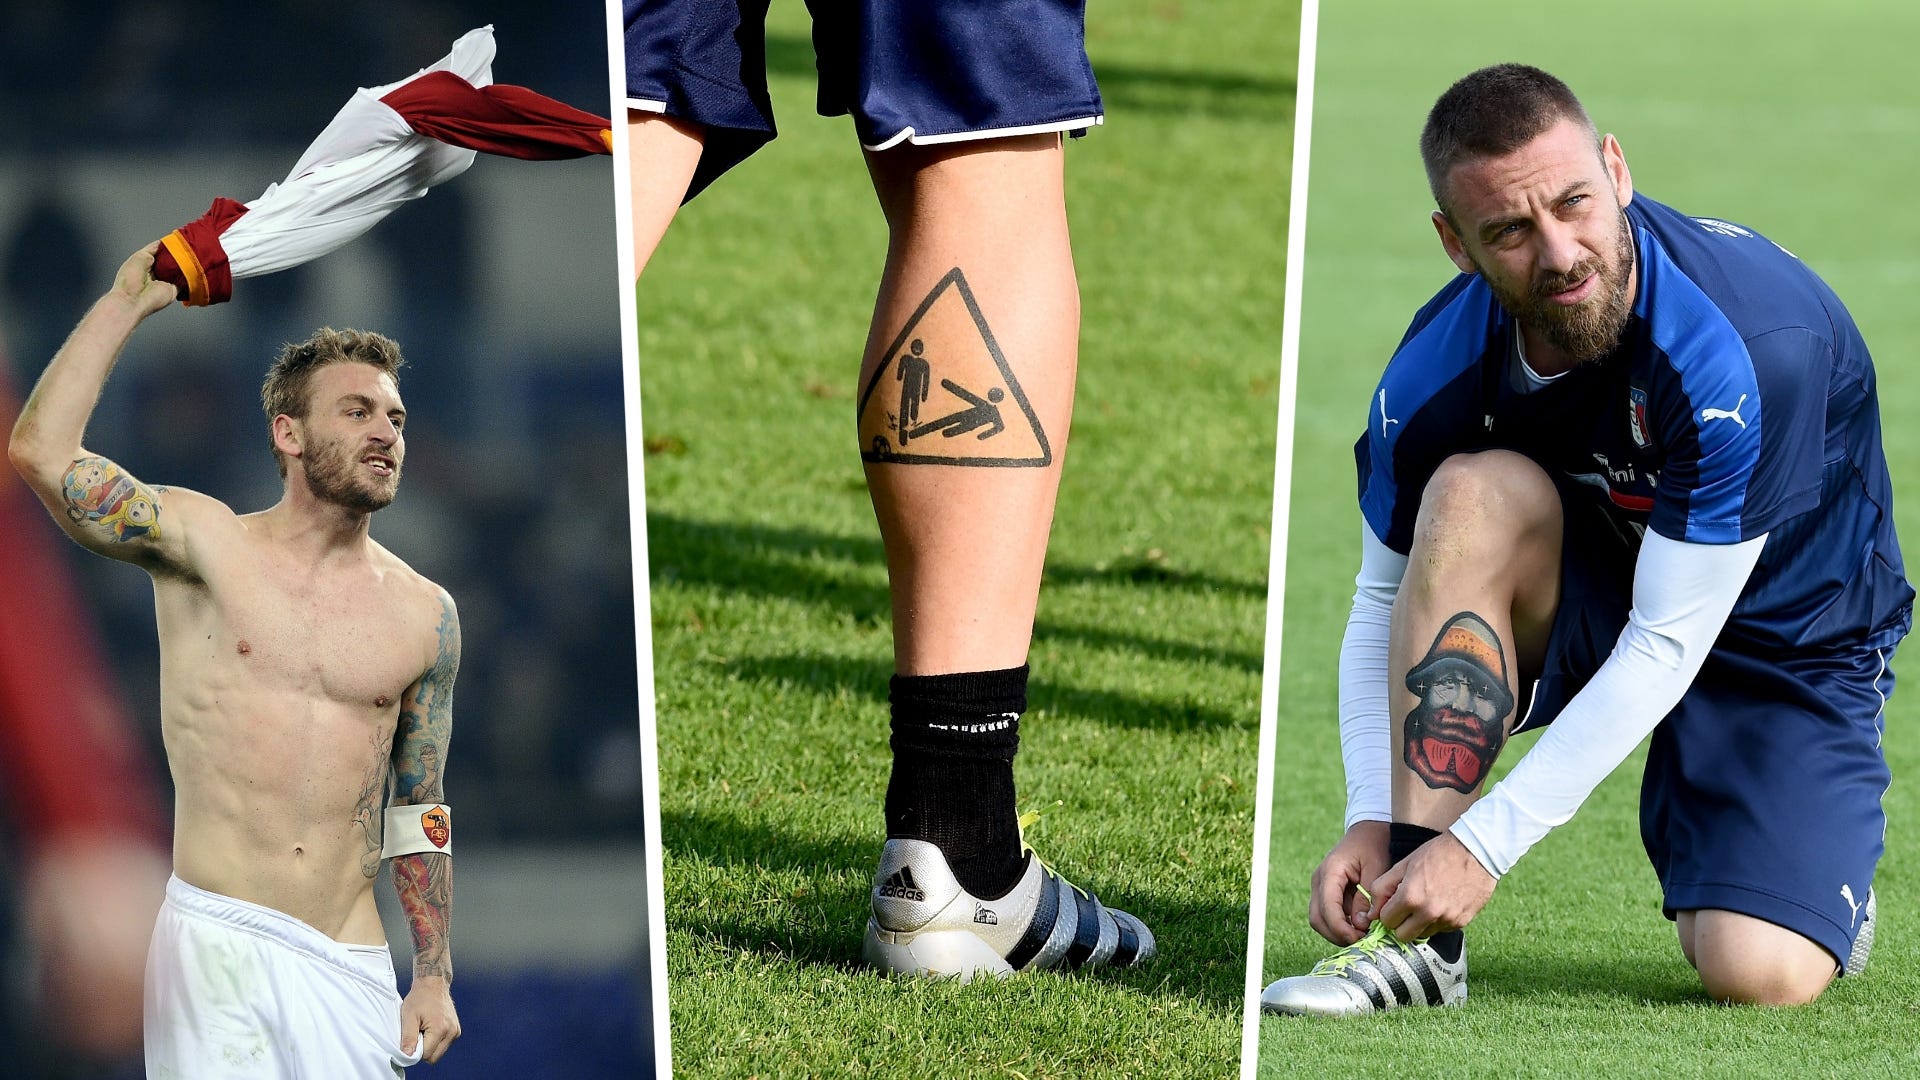 What are the best soccer player tattoos? From Ibrahimovic's lion to Messi's Jesus depiction